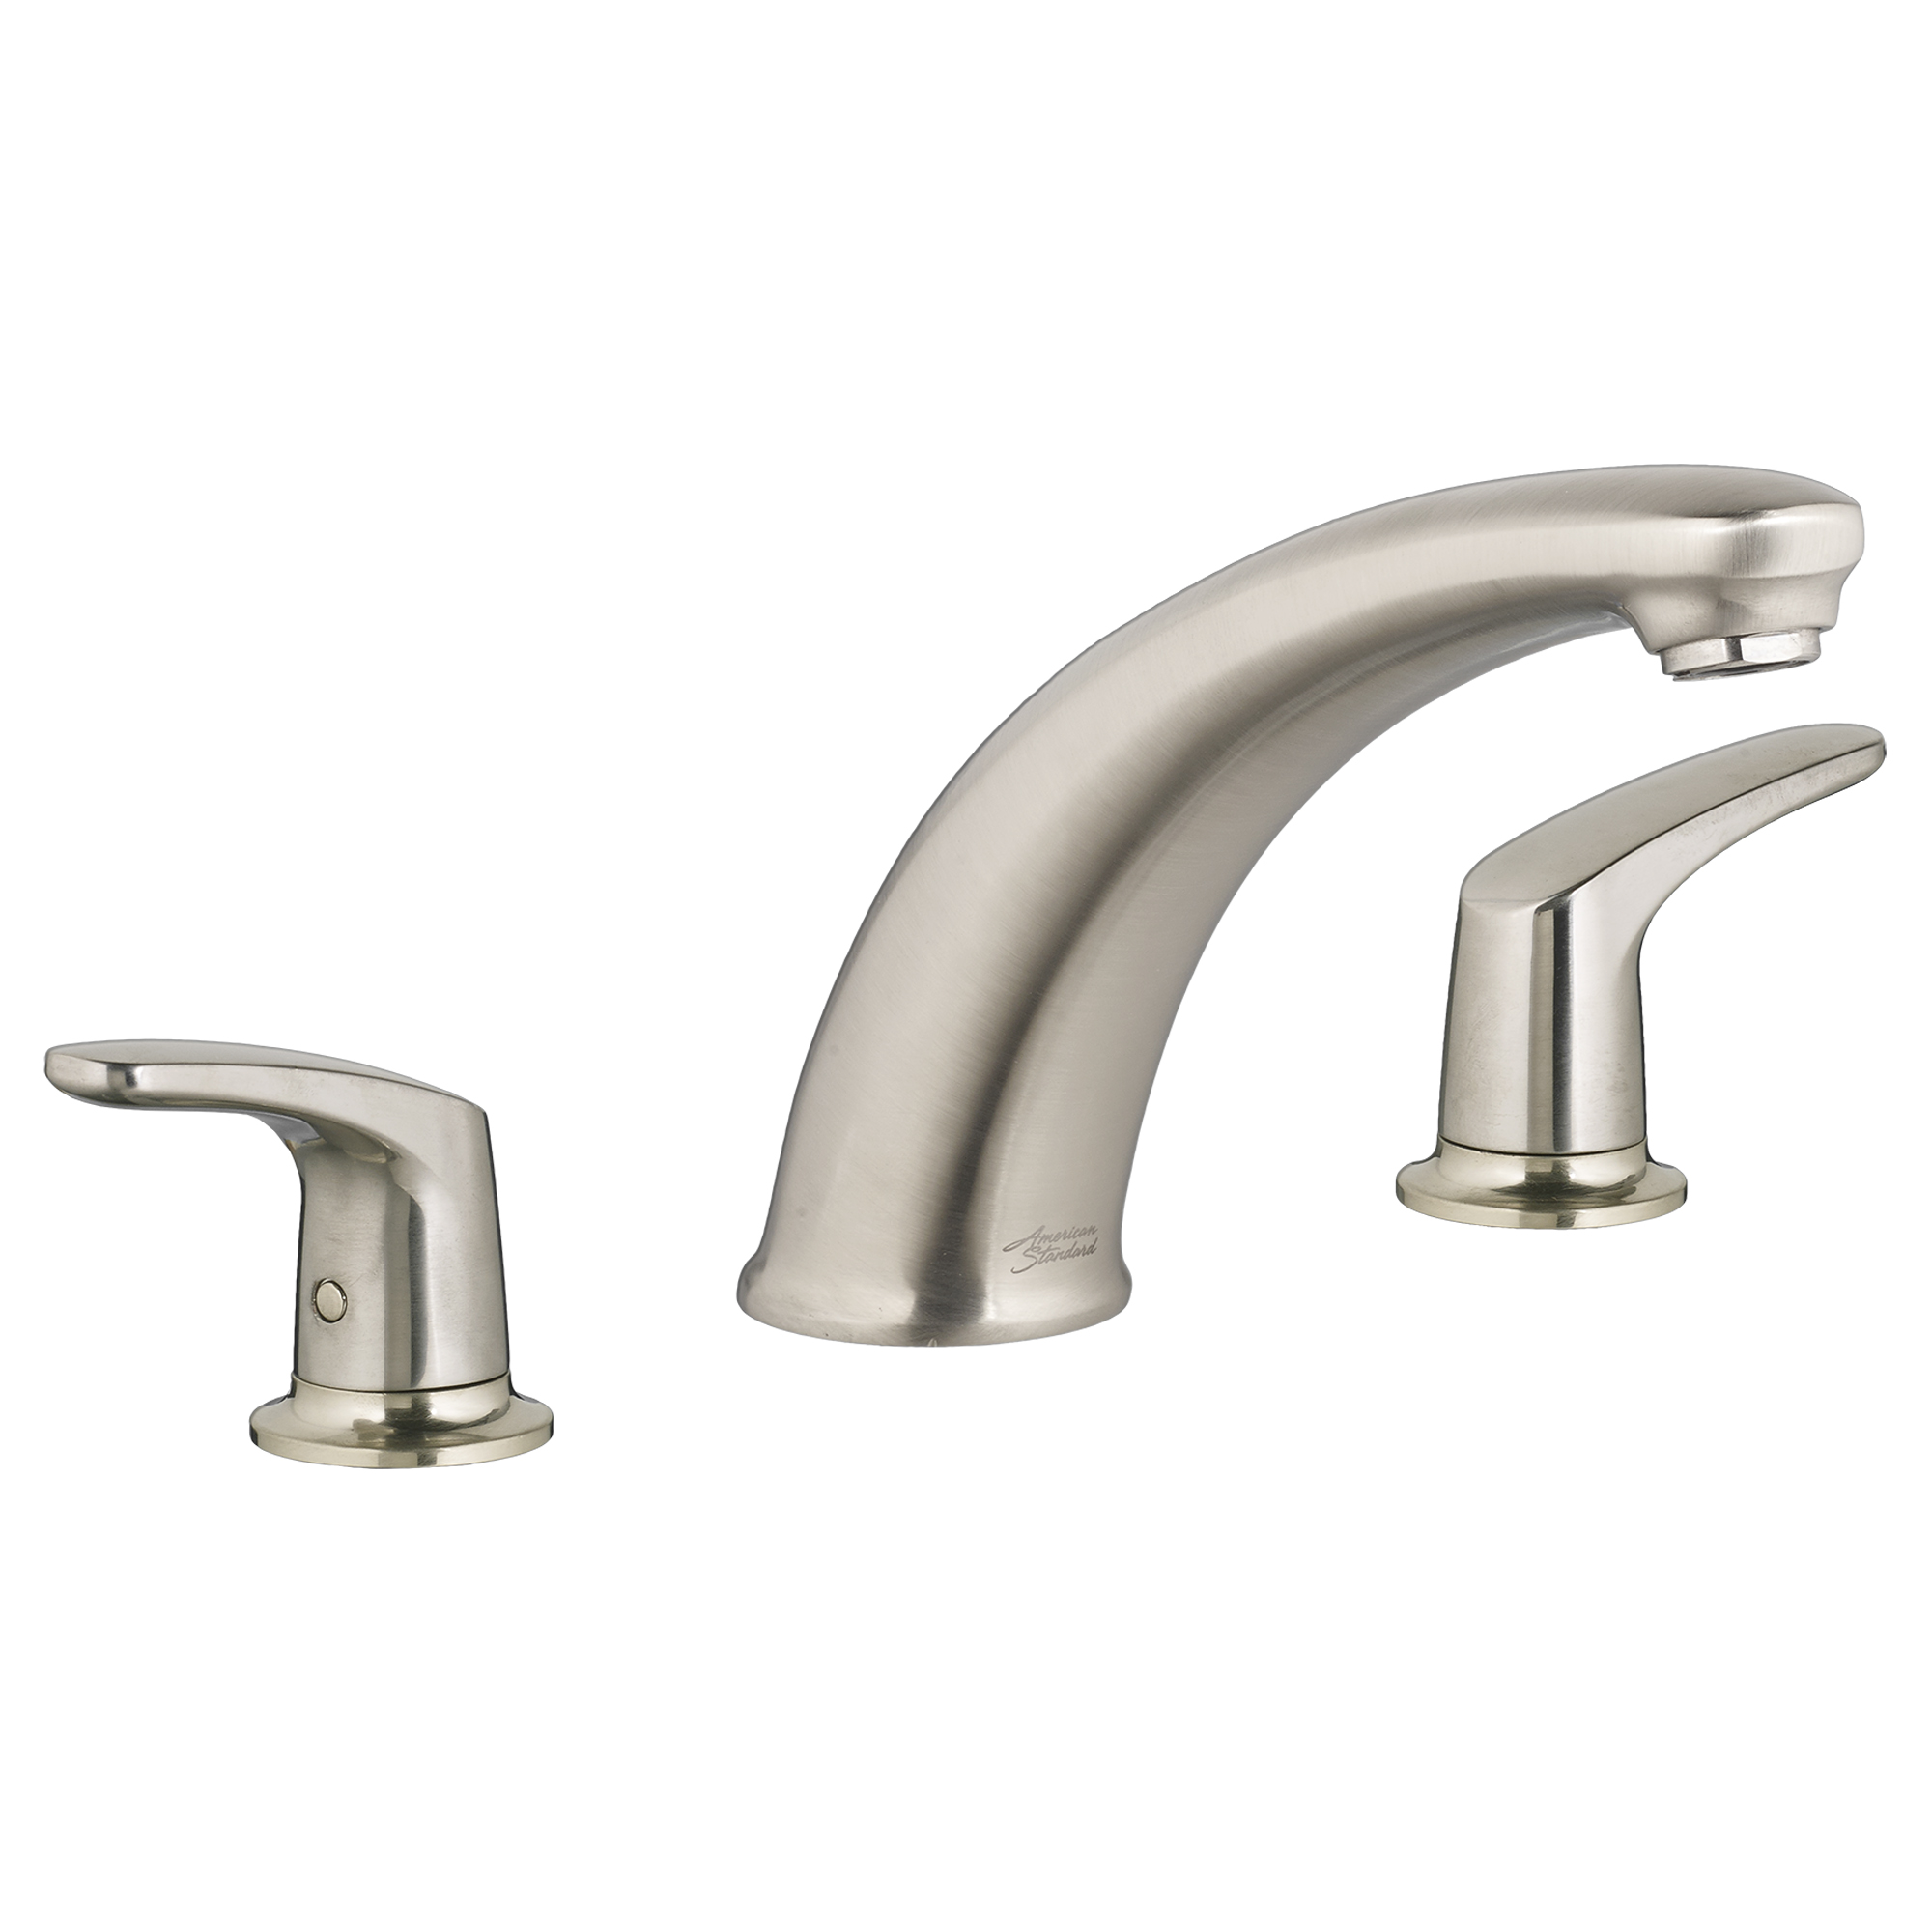 Colony Pro Deck Mount Bathtub Faucet for Flash Rough-in Valves with Lever Handles